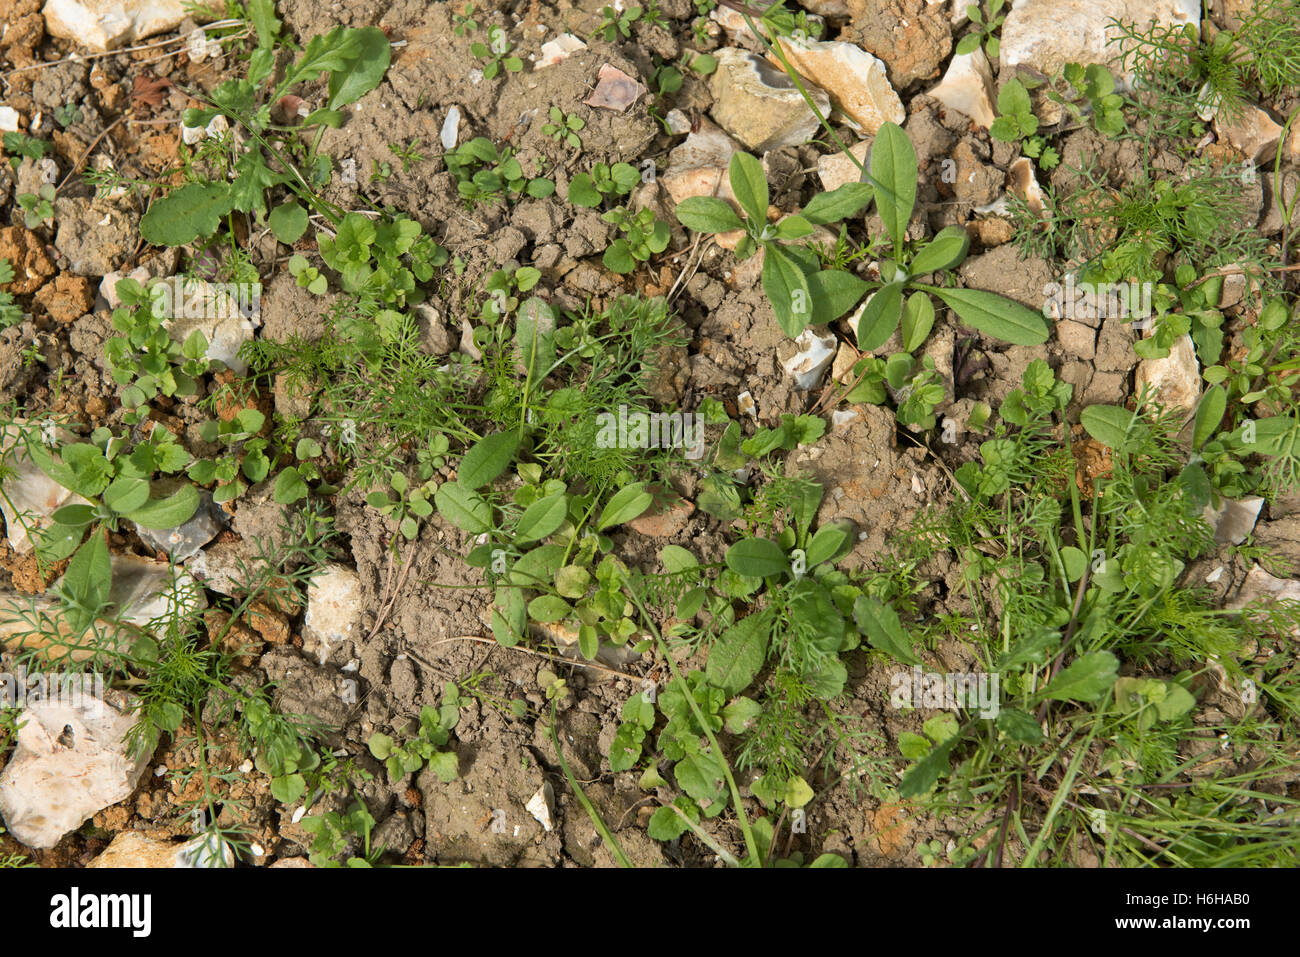 Mixed annual arable broad-leaved weed seedlings and young plants on stony seedbed, July Stock Photo